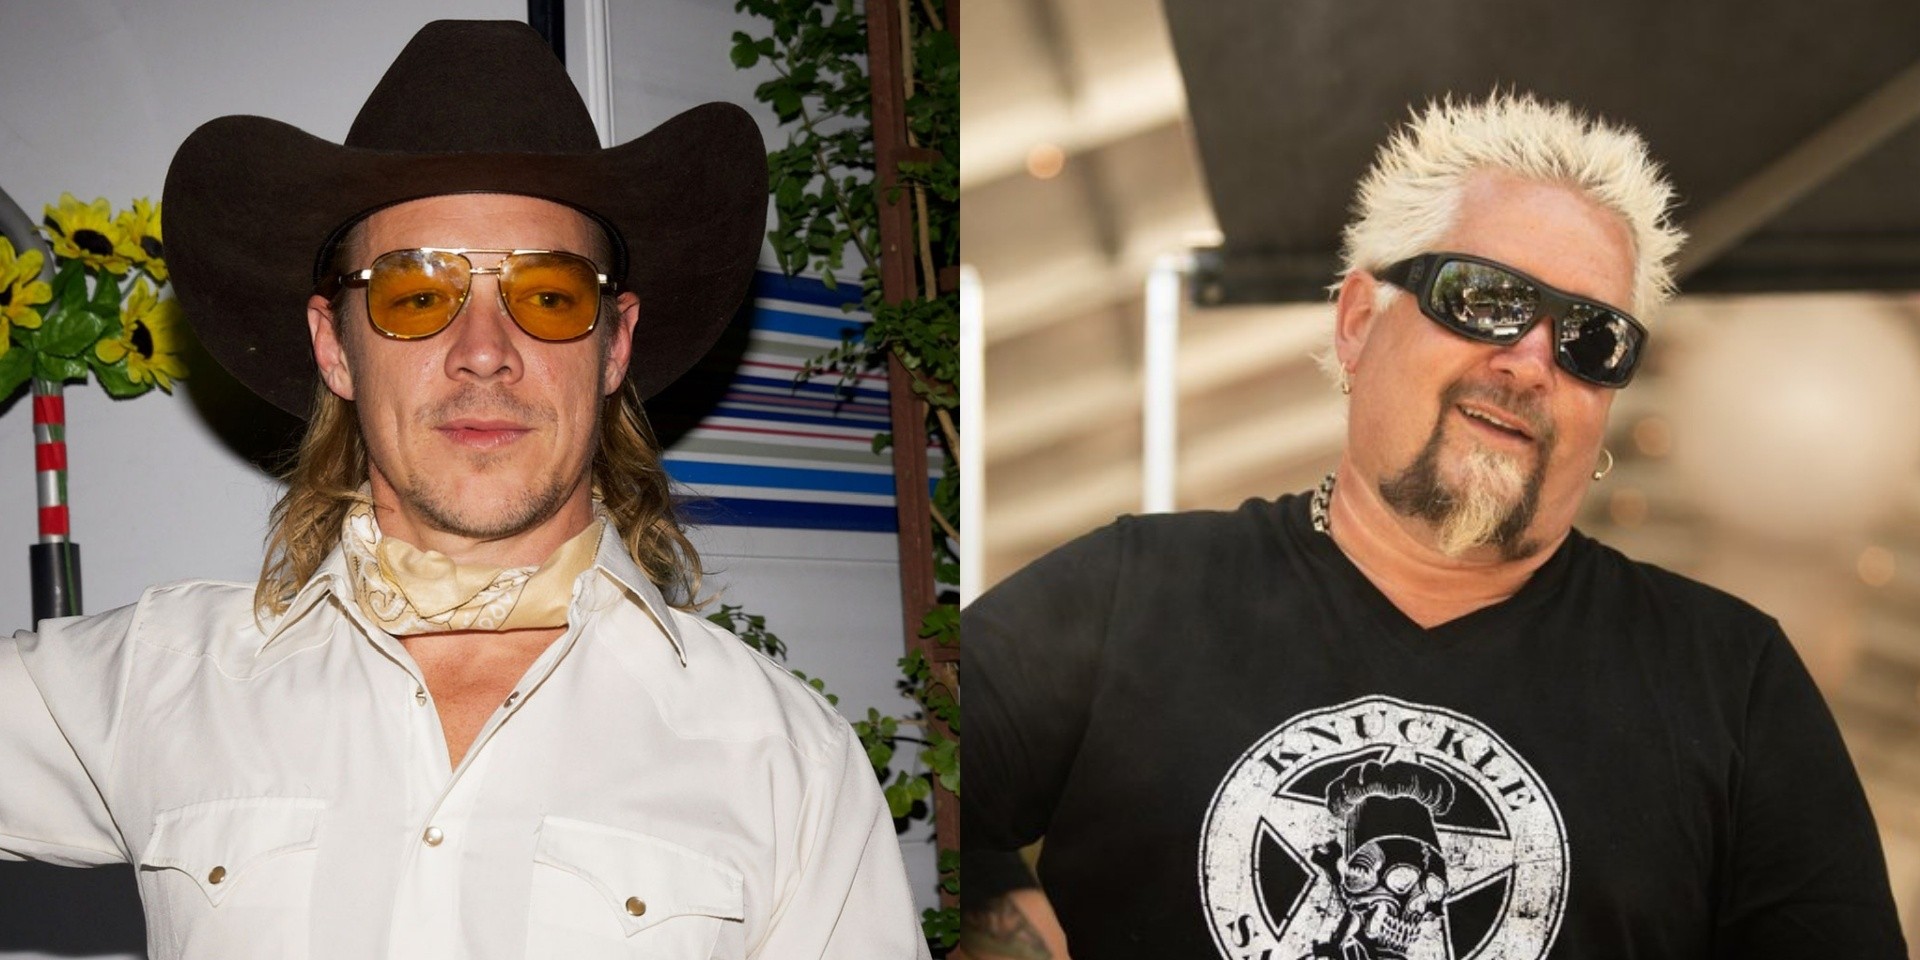 Guy Fieri, Billy Ray Cyrus, and Lil Nas X party in new Diplo music video, ‘So Long ft. Cam’ – watch 